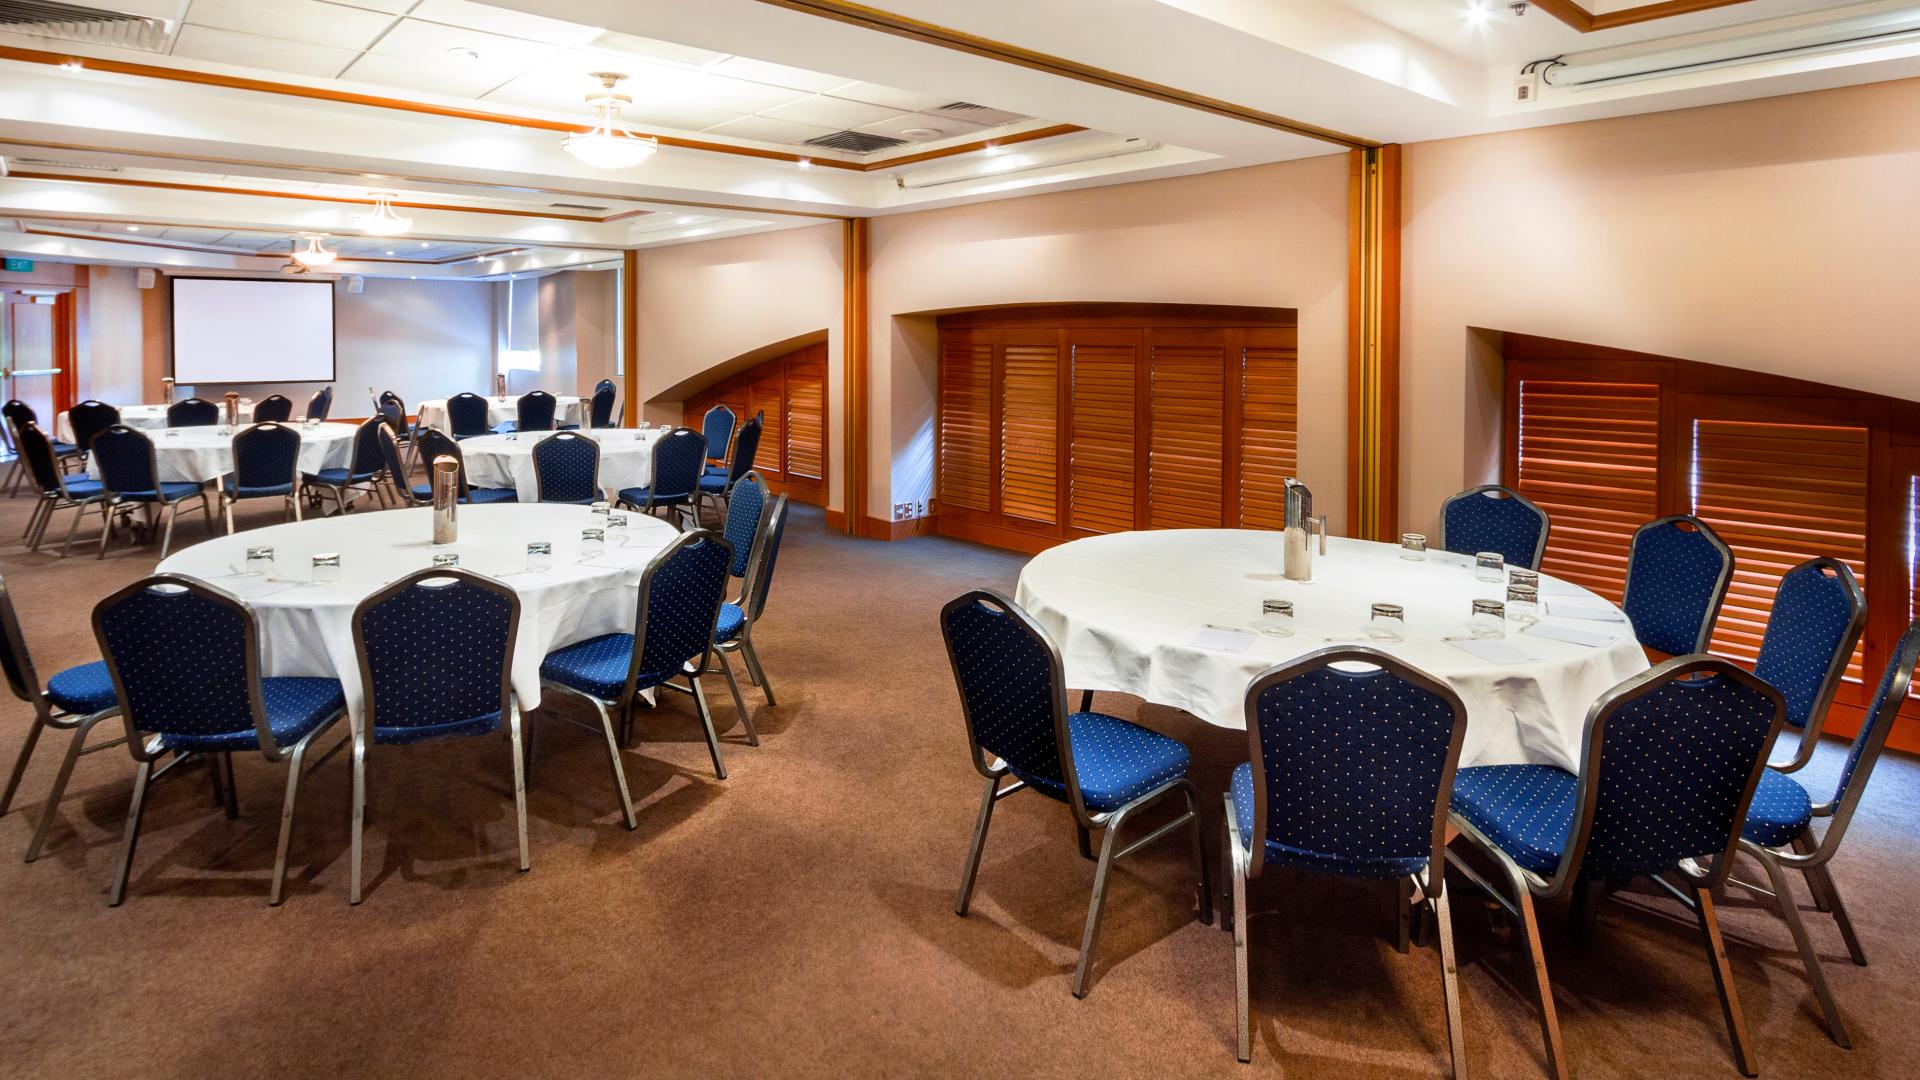 Function Rooms for Hire in Surry Hills